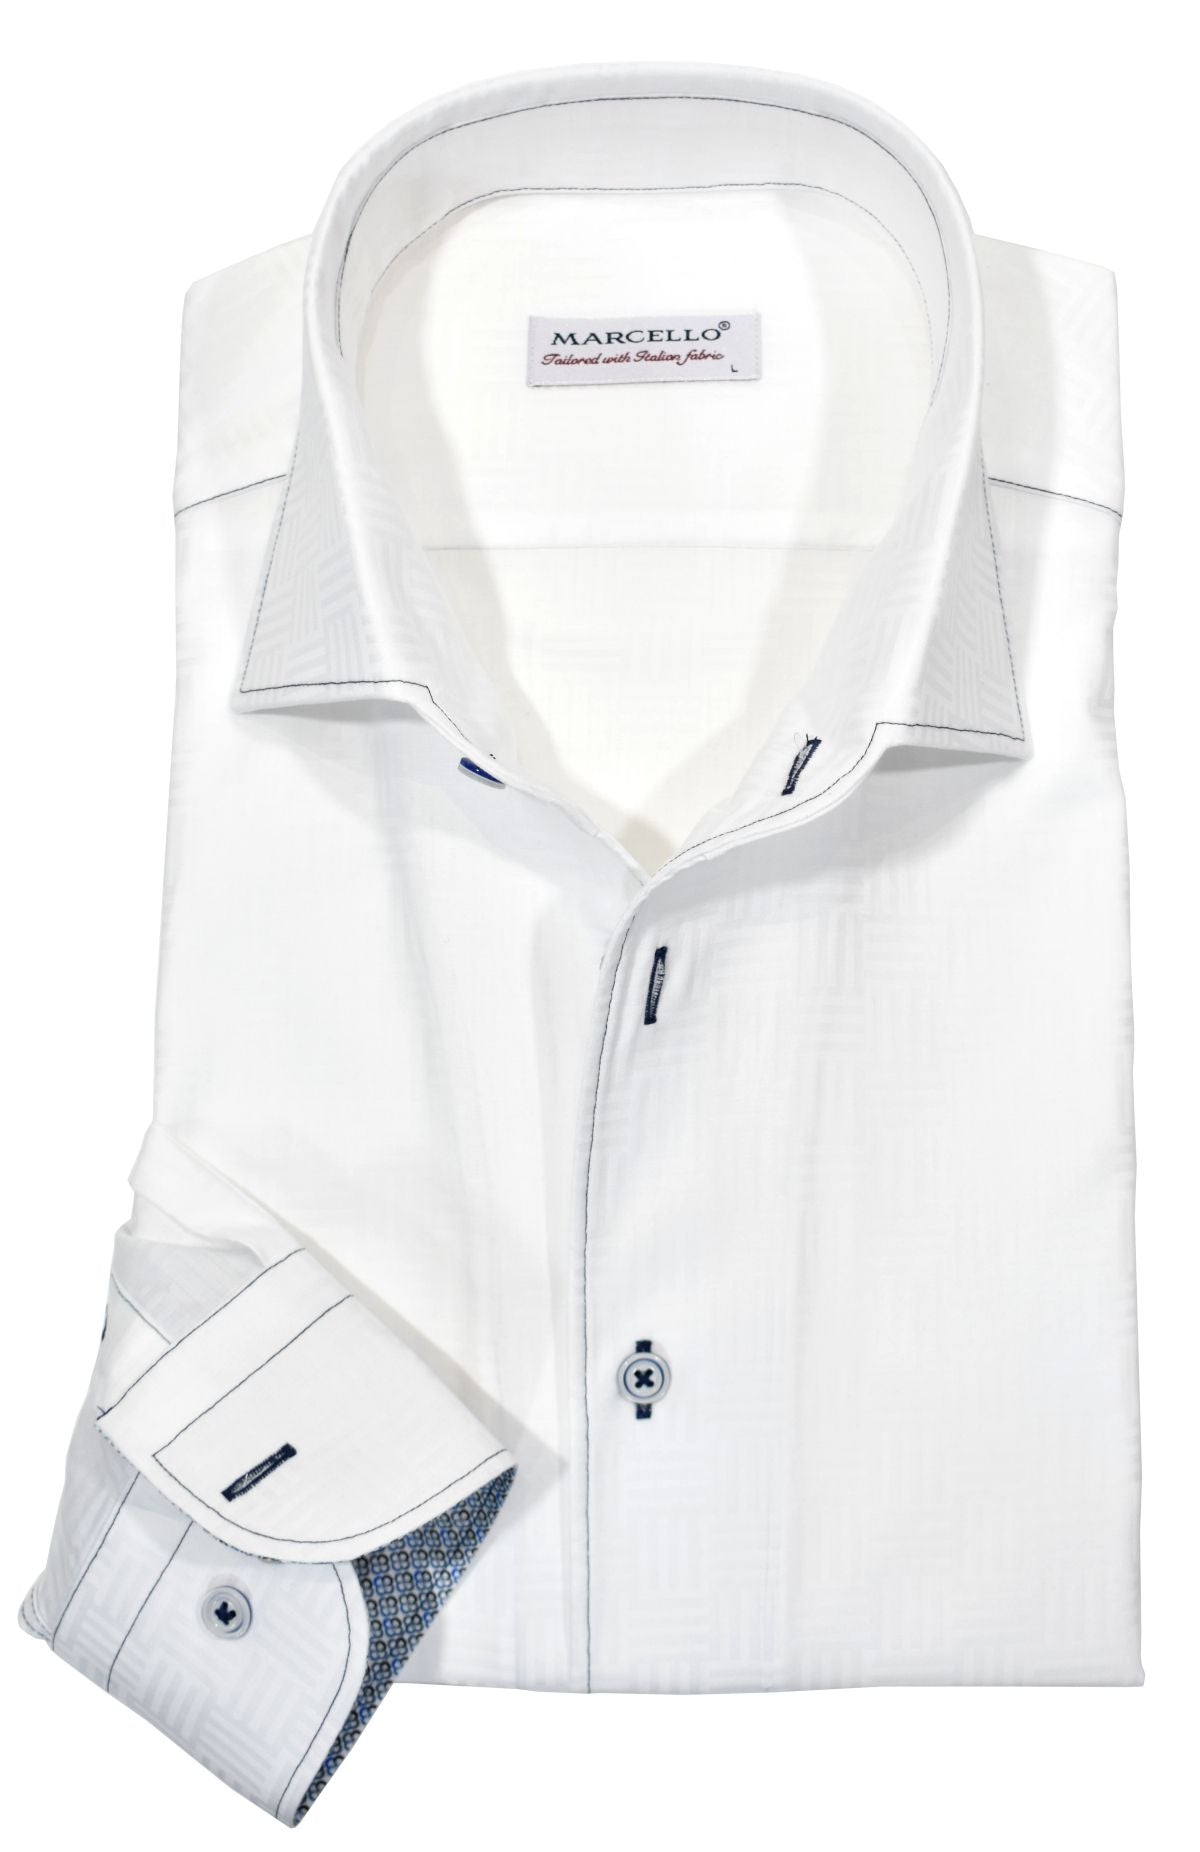 Exclusive Roll Collar. Marcello created this classic white shirt with a tonal jacquard featuring geometric lines, rendered in a soft cotton sateen fabric. Perfectly matched buttons and cuff trim fabric, along with contrast stitching, provide a unique twist to the iconic design. A classic shaped fit ensures it stands out in any setting and pairs easily with any outfit.